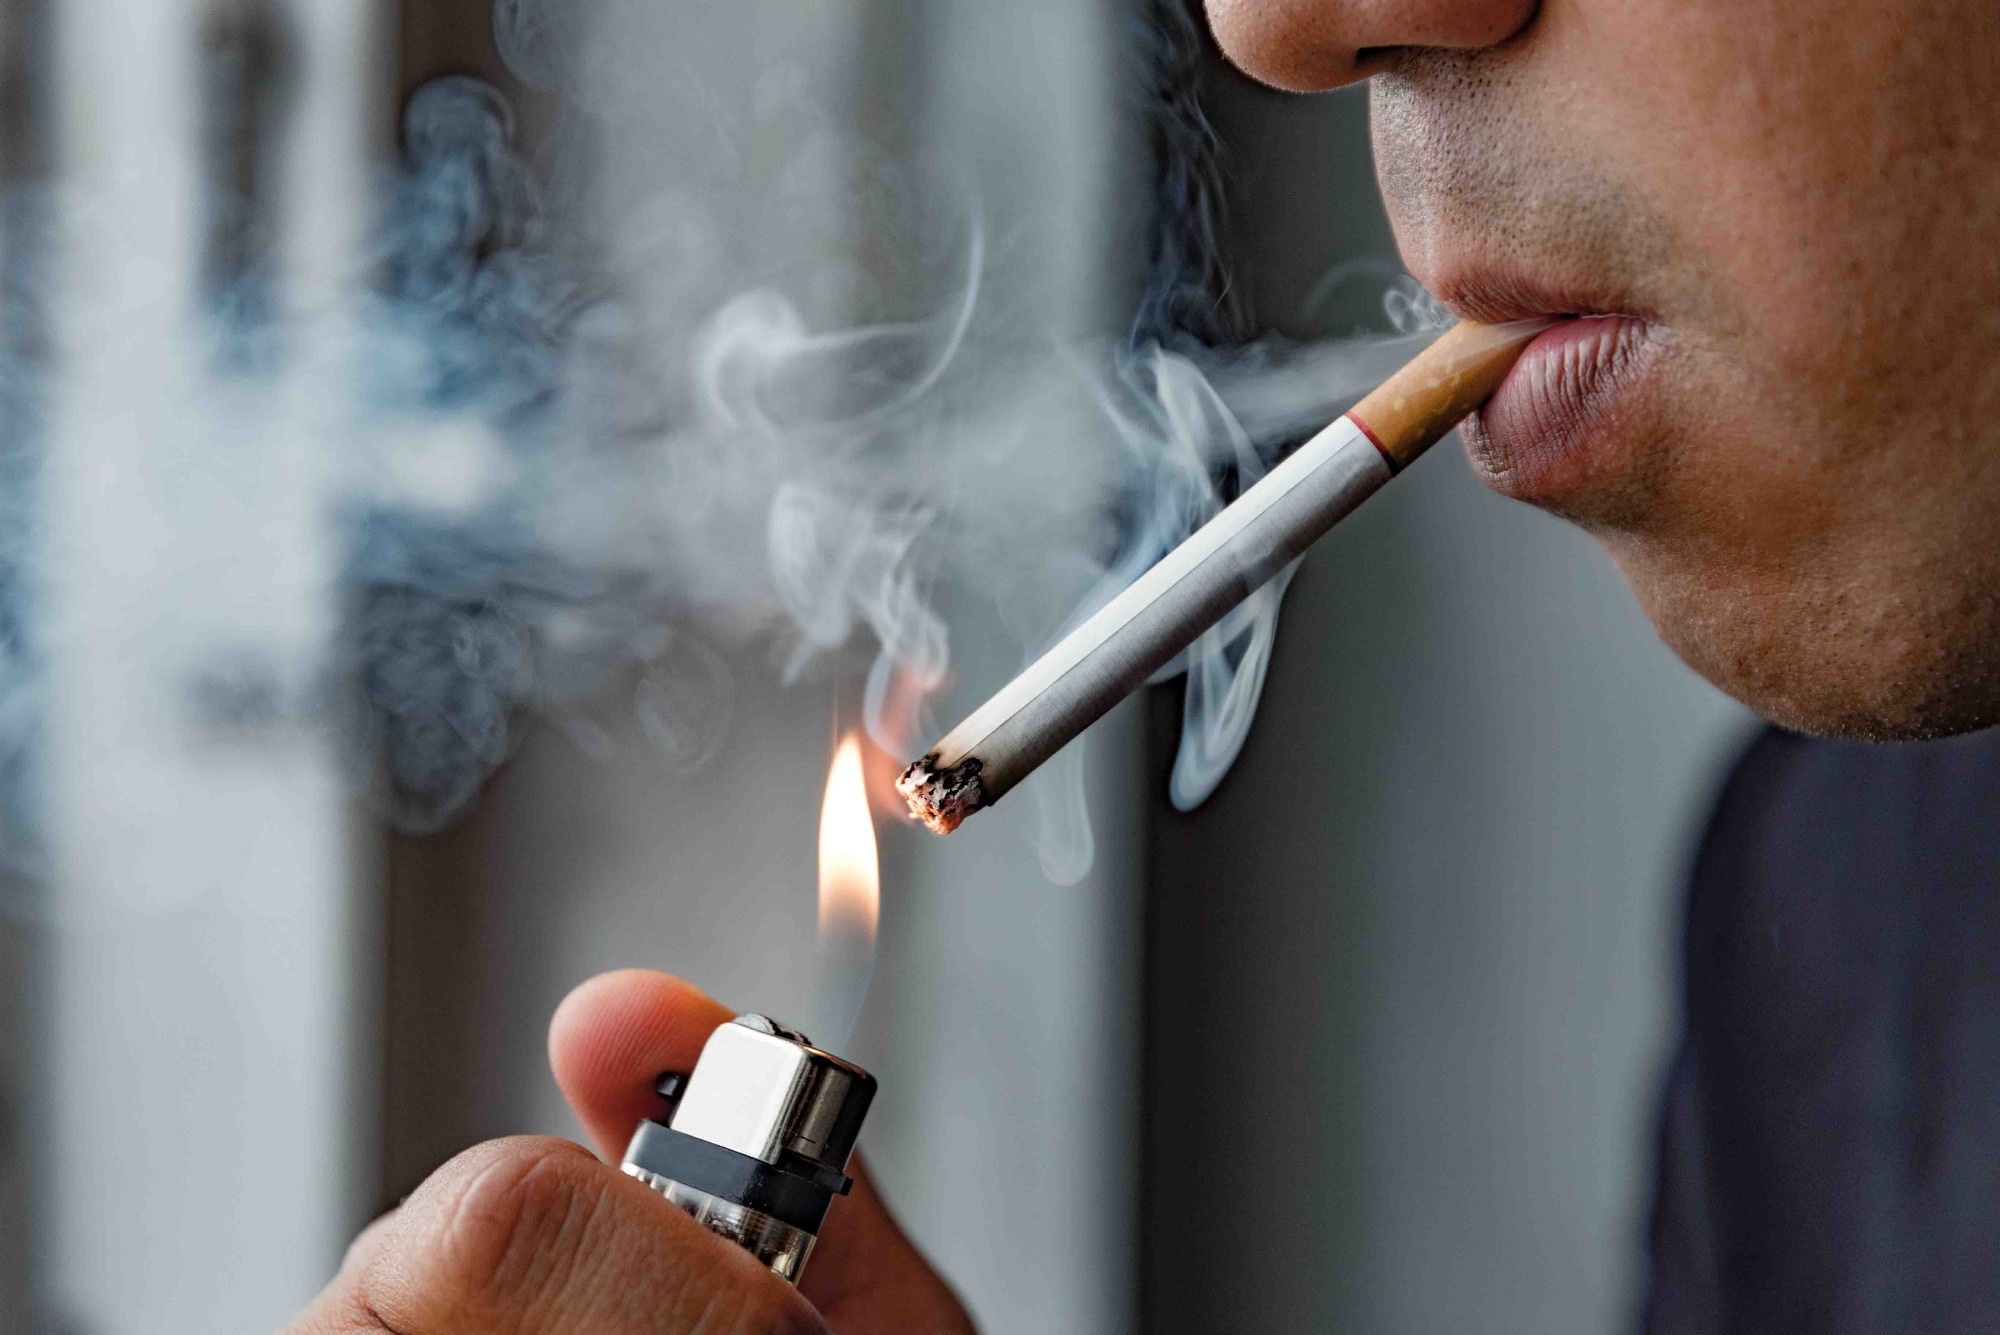 Study: Combined effects of smoking and HIV infection on the occurrence of aging-related manifestations. Image Credit: Nopphon_1987/Shutterstock.com